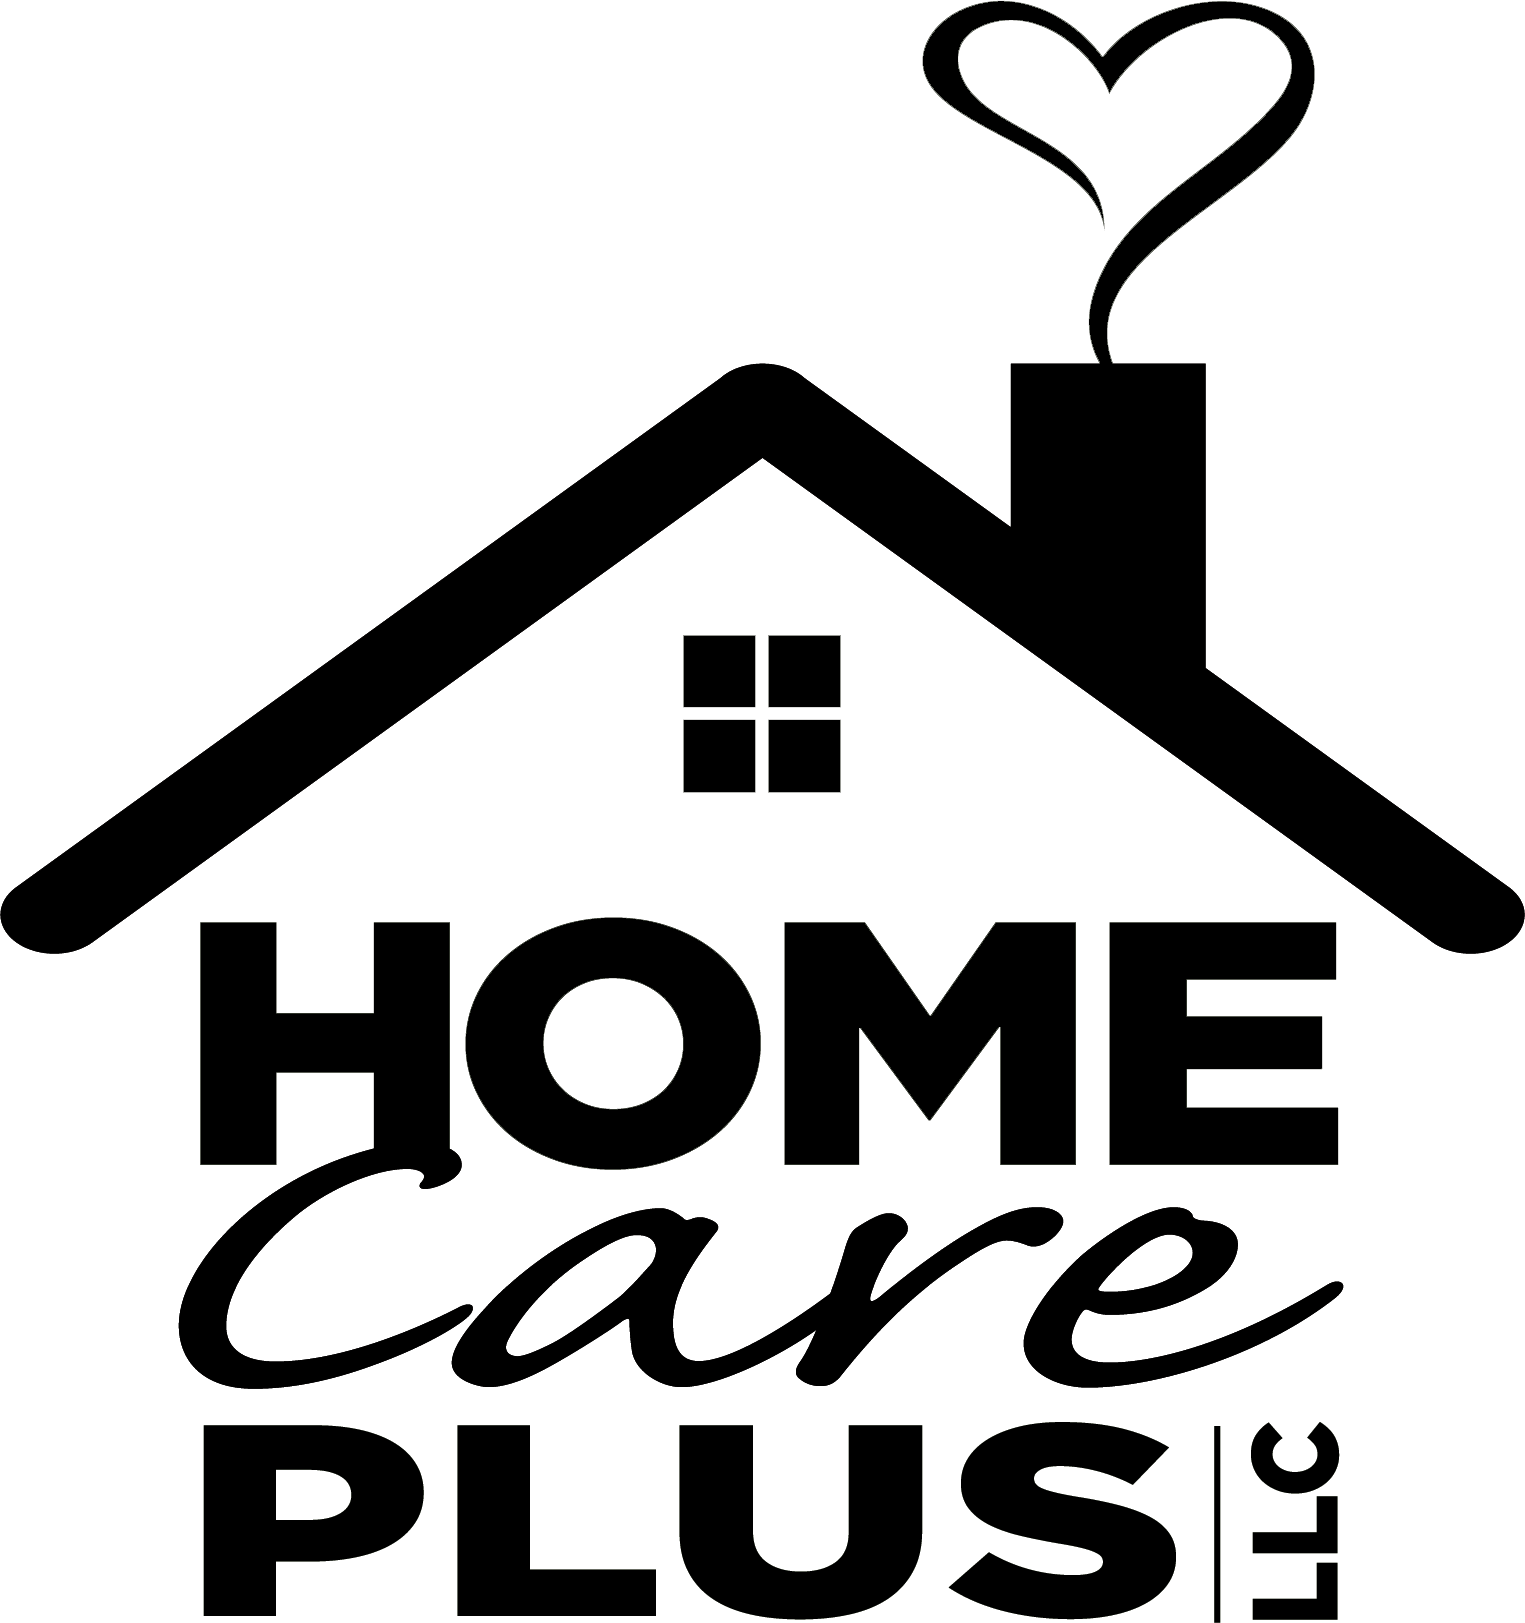 Home Care Plus Llc - Home Security (1525x1623)